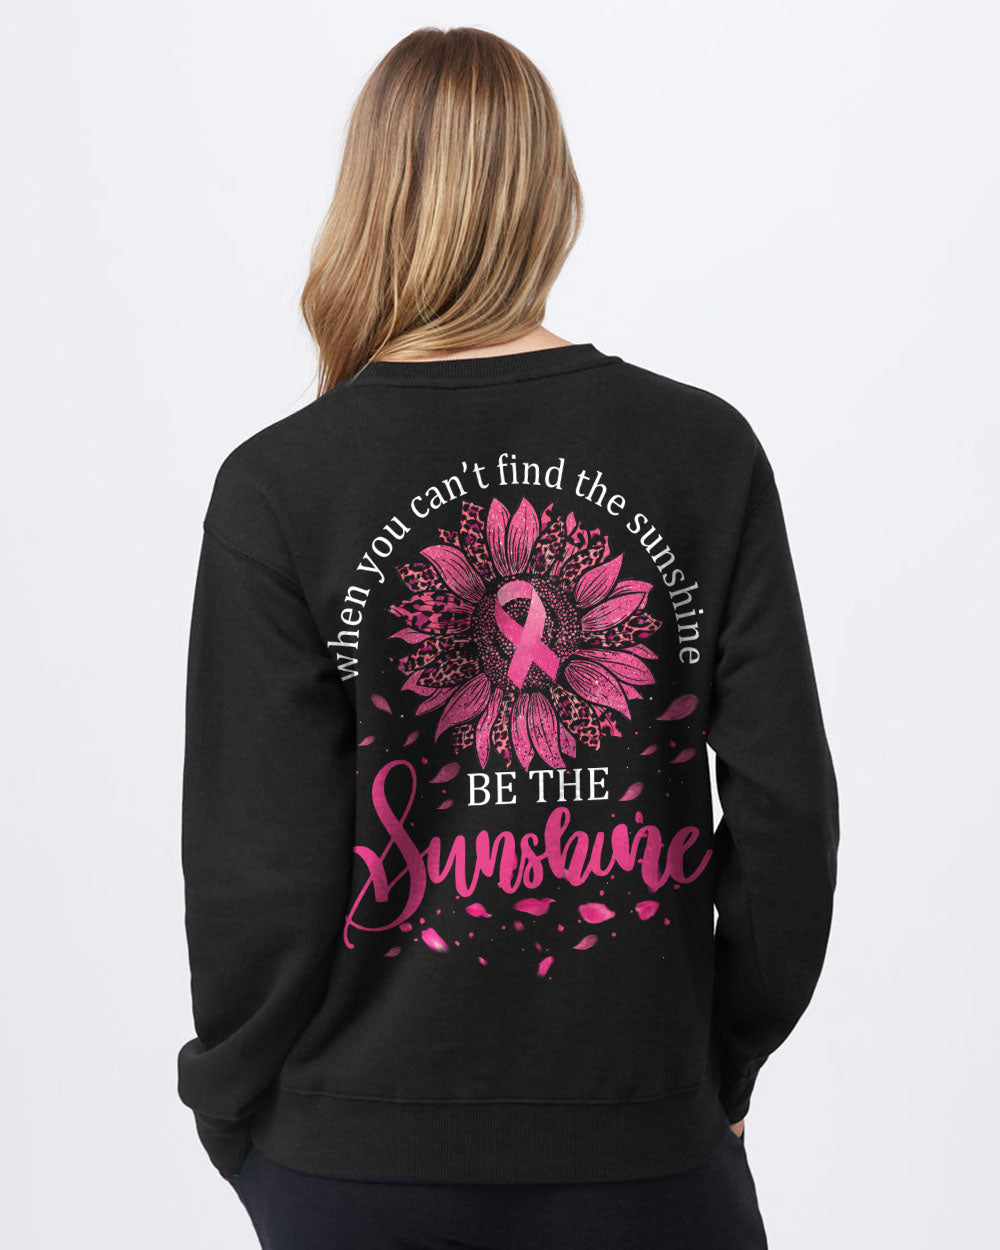 When You Can't Find The Sunshine Women's Breast Cancer Awareness Sweatshirt